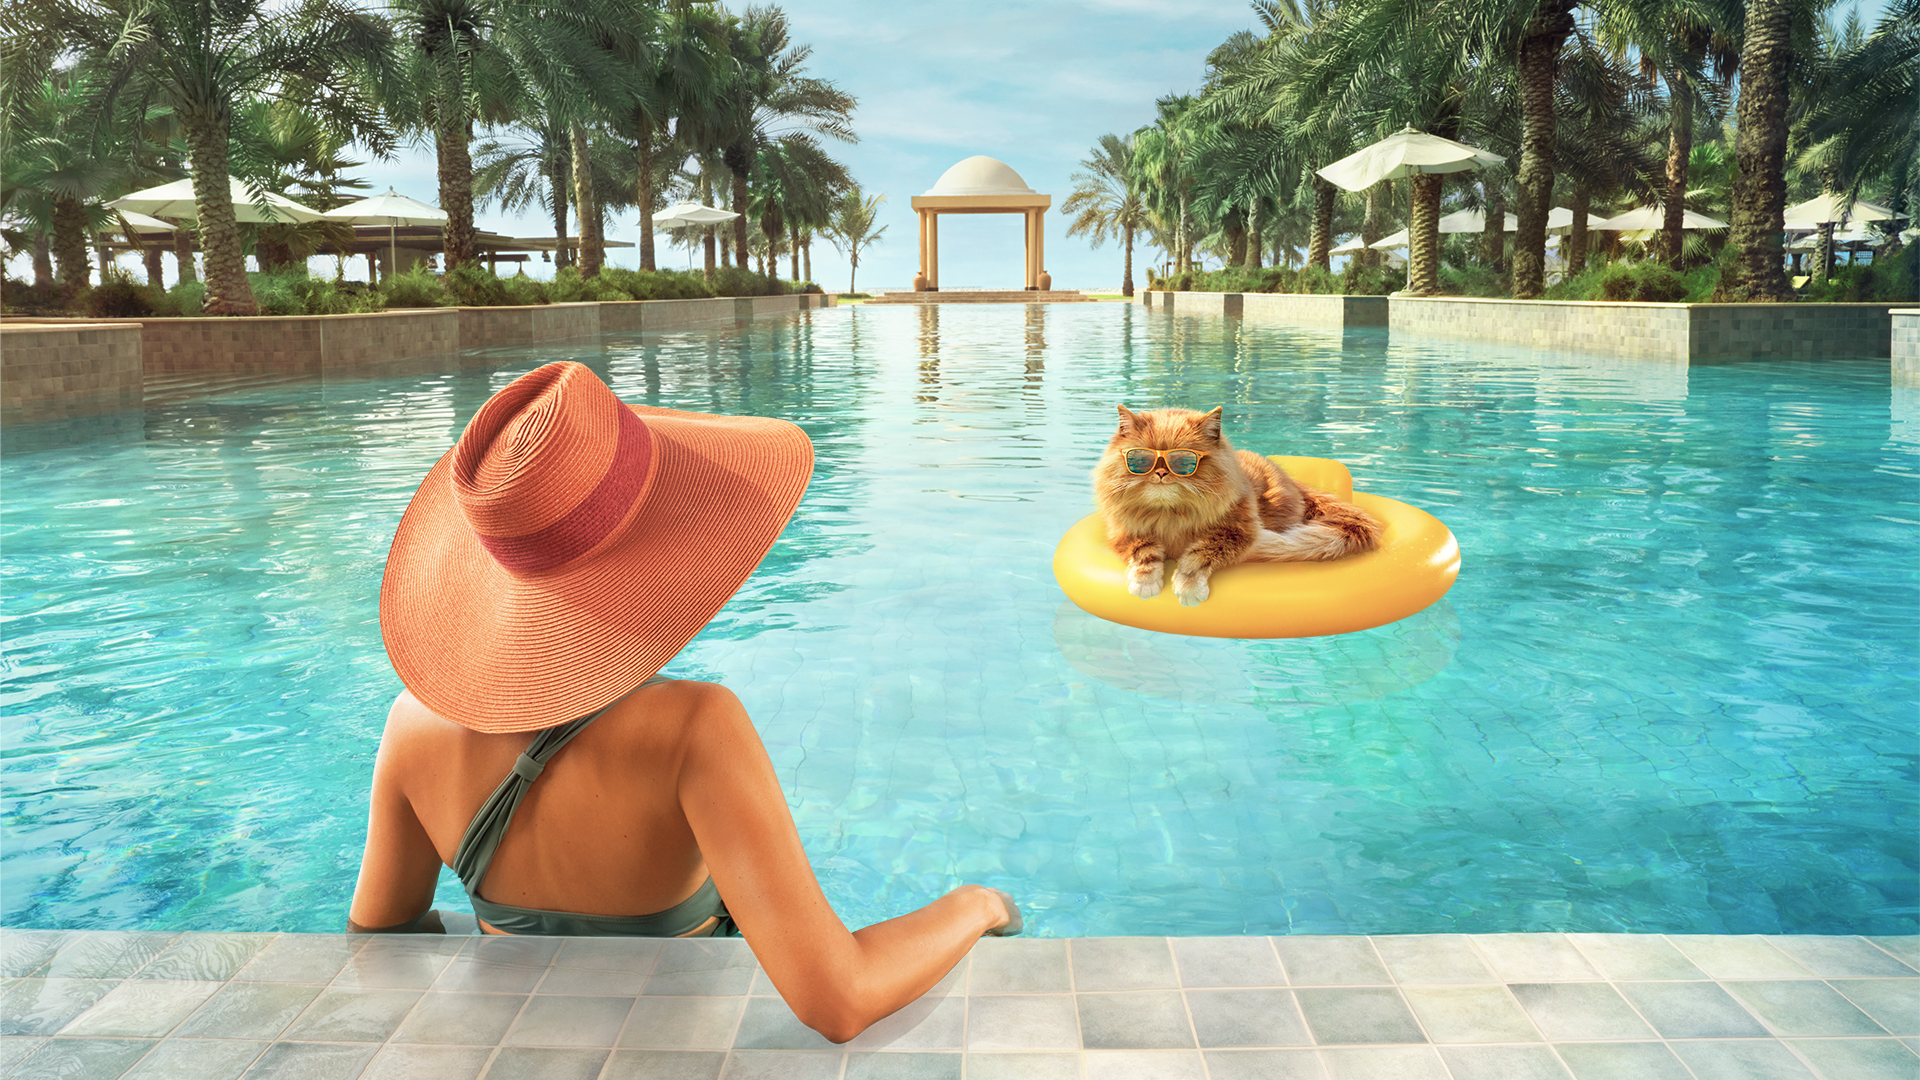 Leo the Cat lounging in a pool as part of the Ras Al Khaimah Tourism Development Authority 'All About You' campaign.